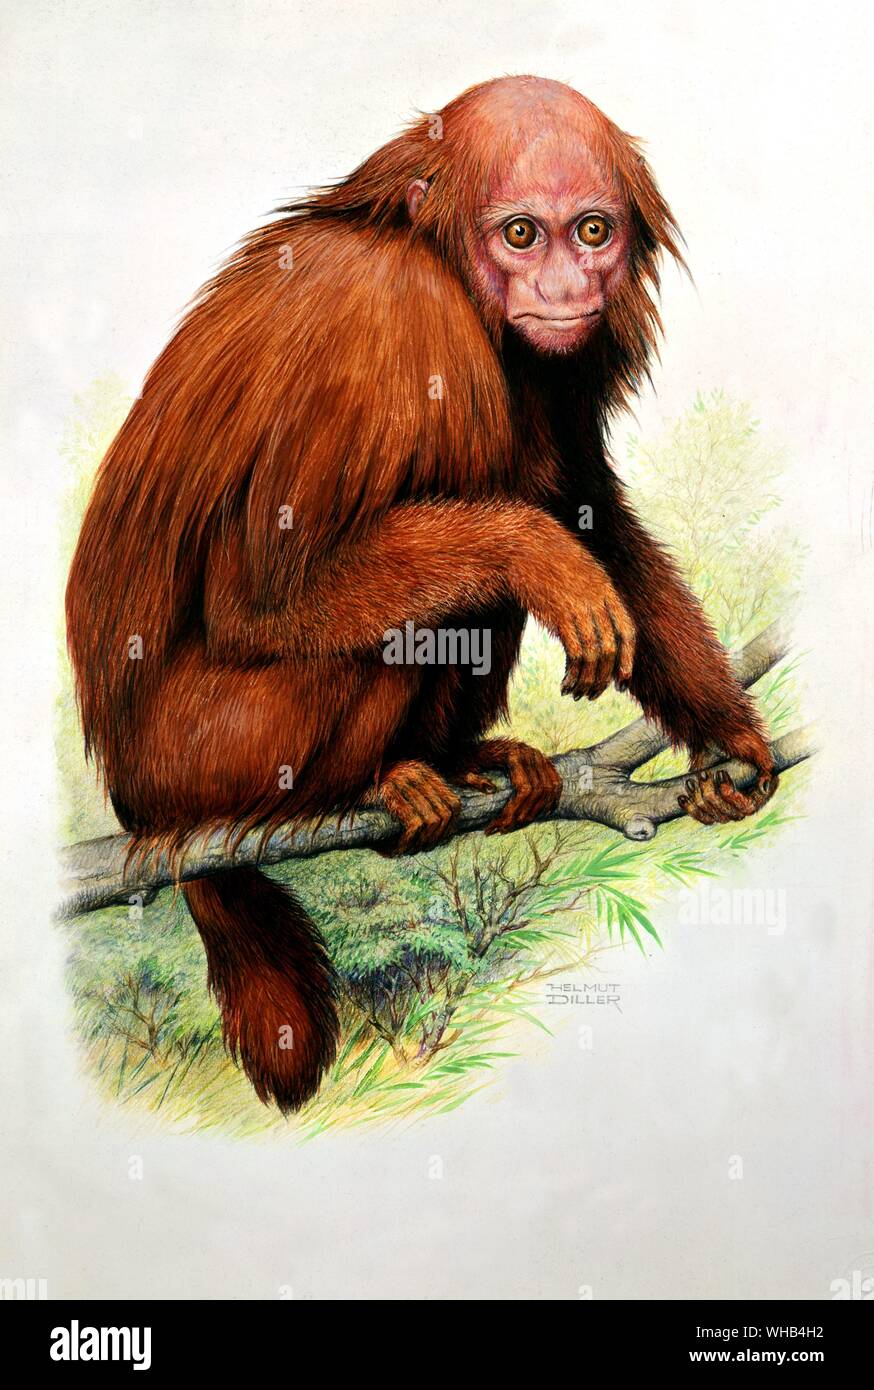 Red Uakari (Brazil-Peru border forests) by Helmut Diller - . Uakari is the common name for the New World monkeys of the genus Cacajao. The common name is believed to come from the indigenous term for Dutchmen. their red faces apparently reminded the locals of sun-burned Europeans. Cacajao is also believed to be an indigenous name, of unknown meaning now, as the tribe and language is extinct.. Stock Photo